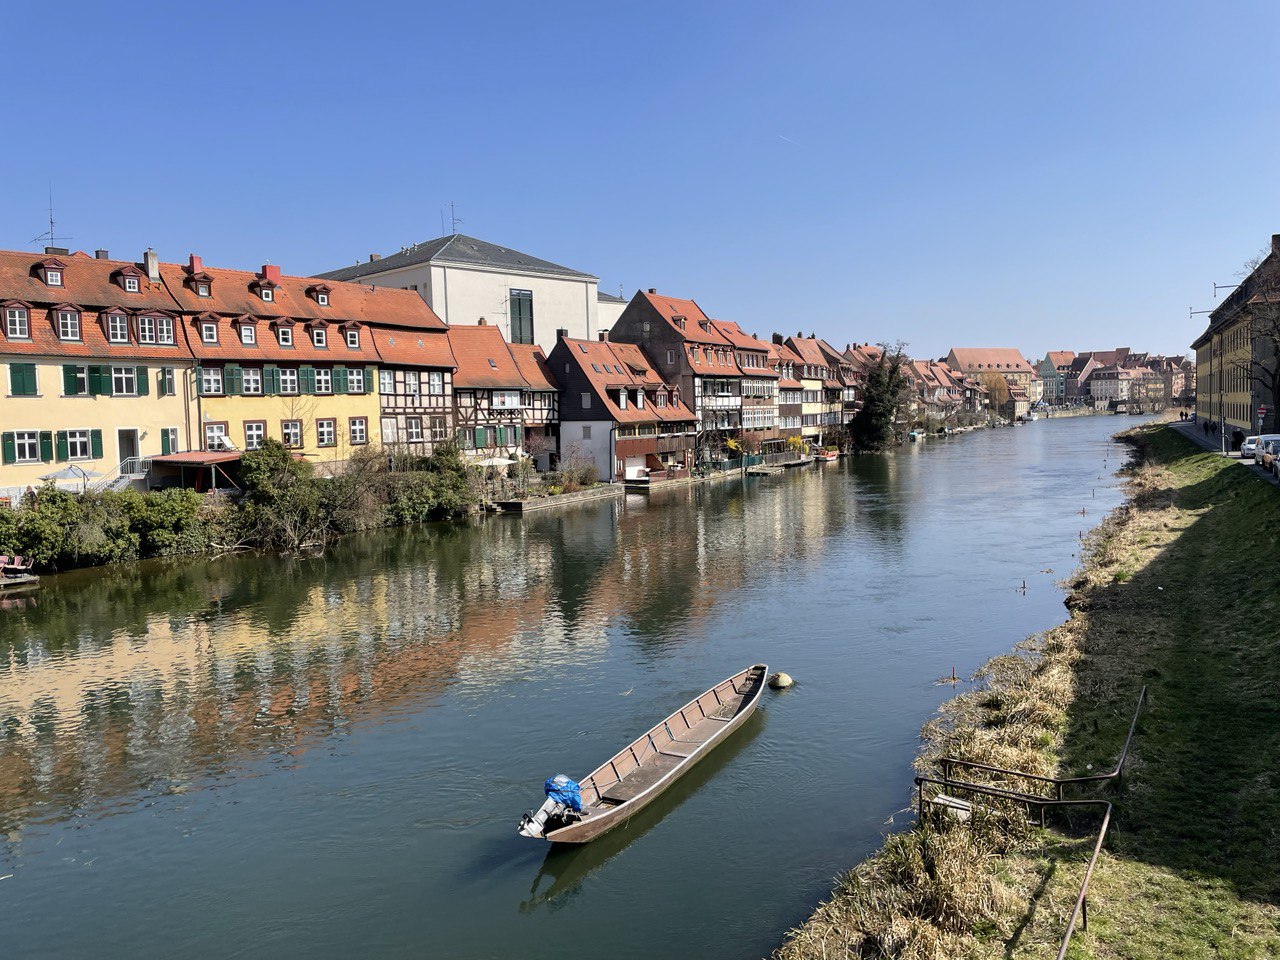 View of the Regnitz river and the Little Venice quarter from one of the many bridges